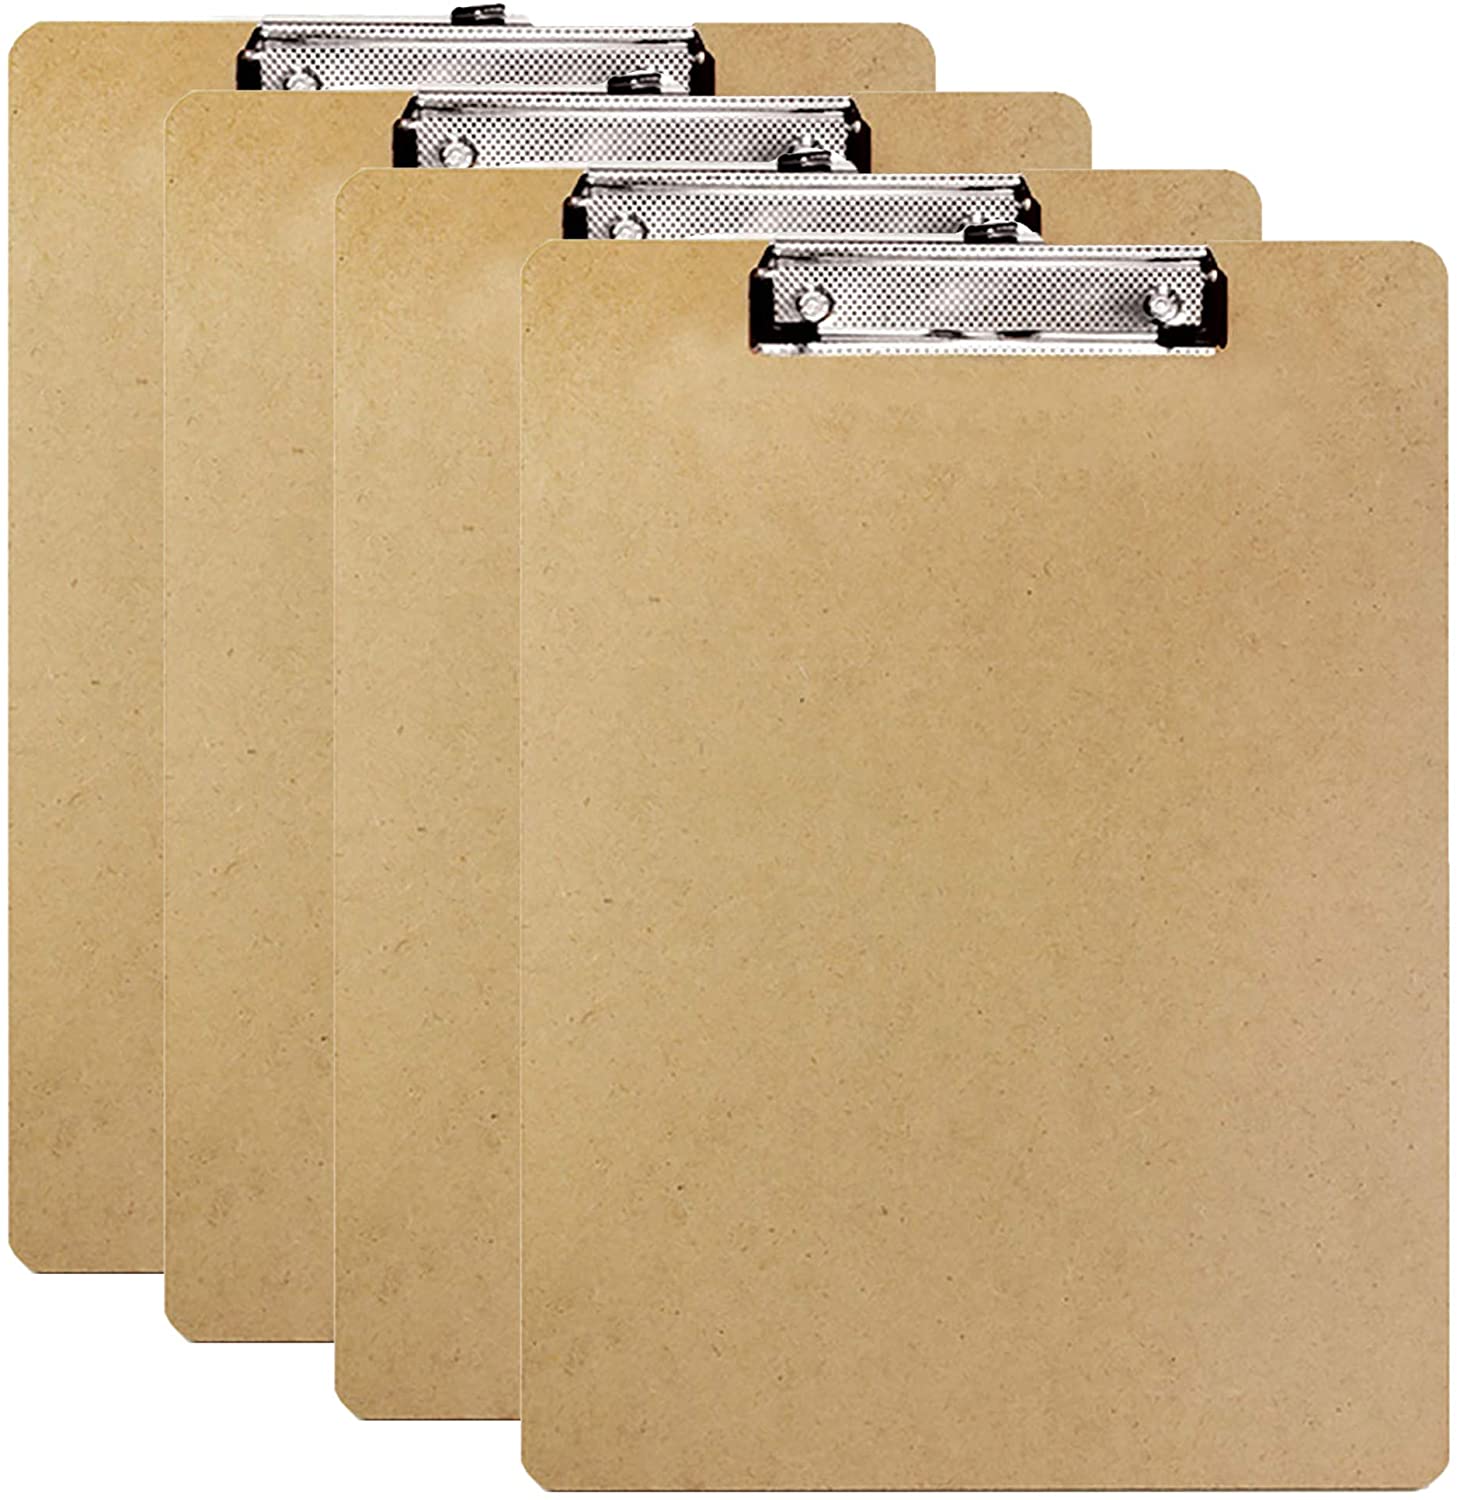 Low Profile Clip, 12.5" x 9" Fit A4 Letter Size Paperboard, Business Office School Teacher Student College, 1-Pack.